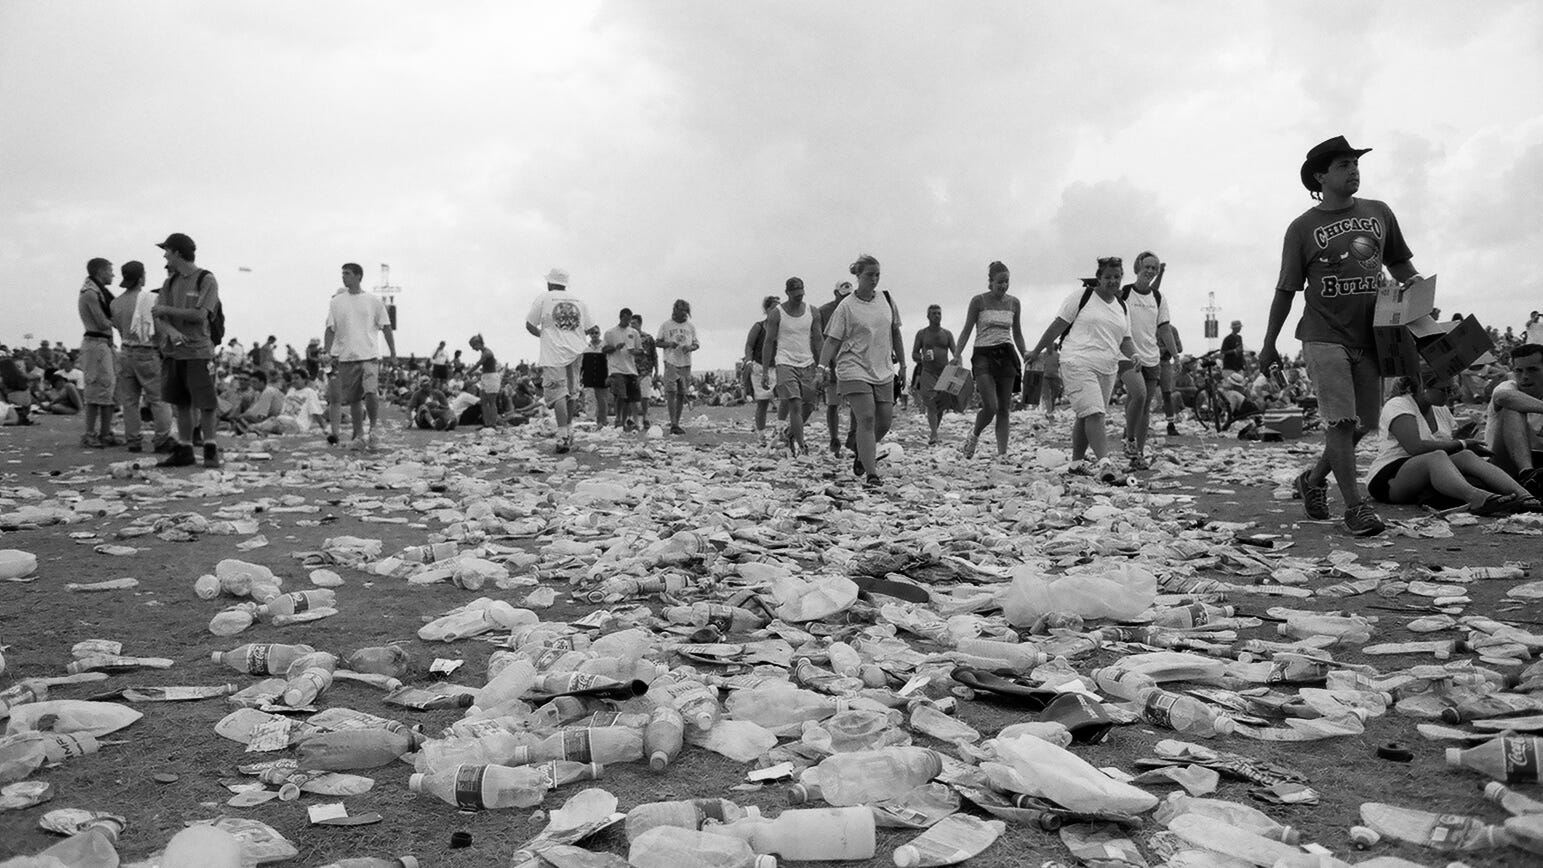 Woodstock 99 attendees walk along piles of trash at Griffiss Air Force Base in Rome, New York.